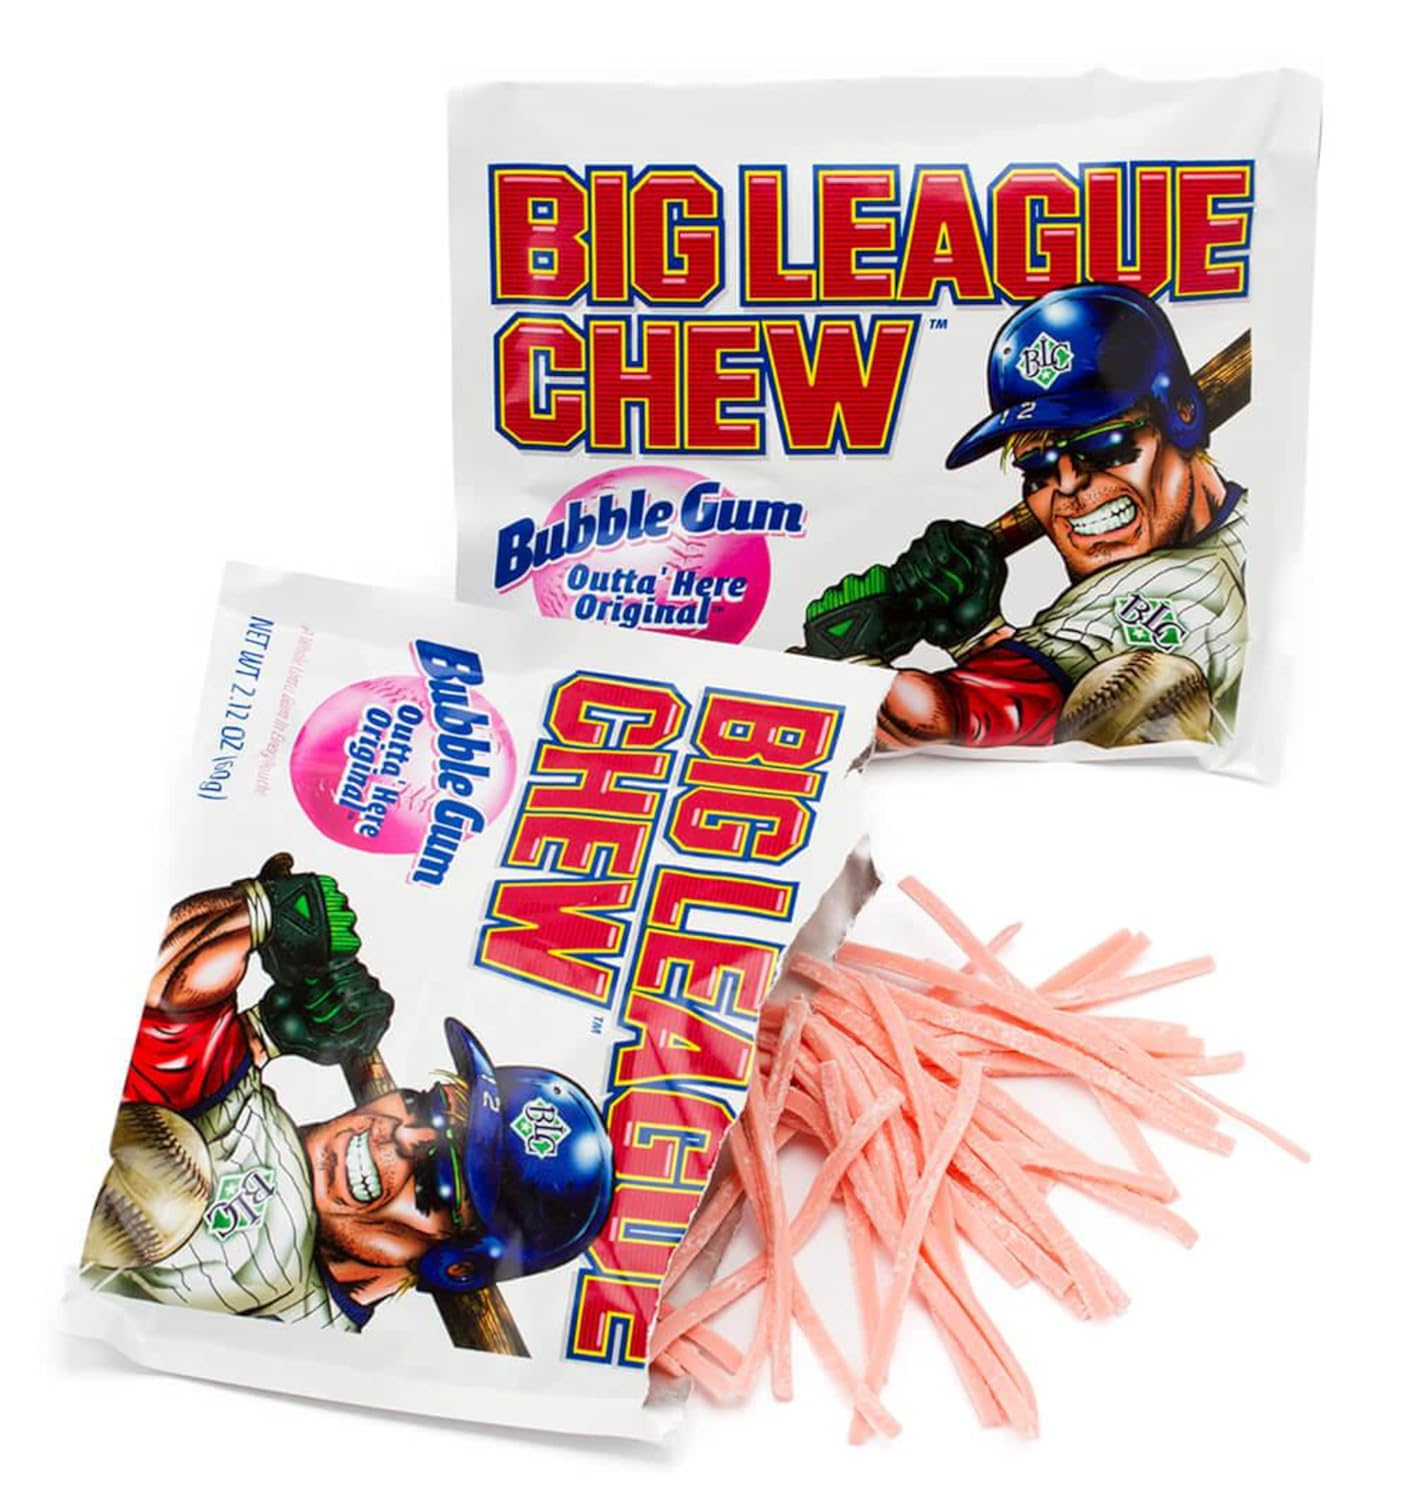 Big League Chew Outta Here Original Shredded Bubble Gum, 2.12 oz (Pack of 3) with By The Cup Mints : Grocery & Gourmet Food